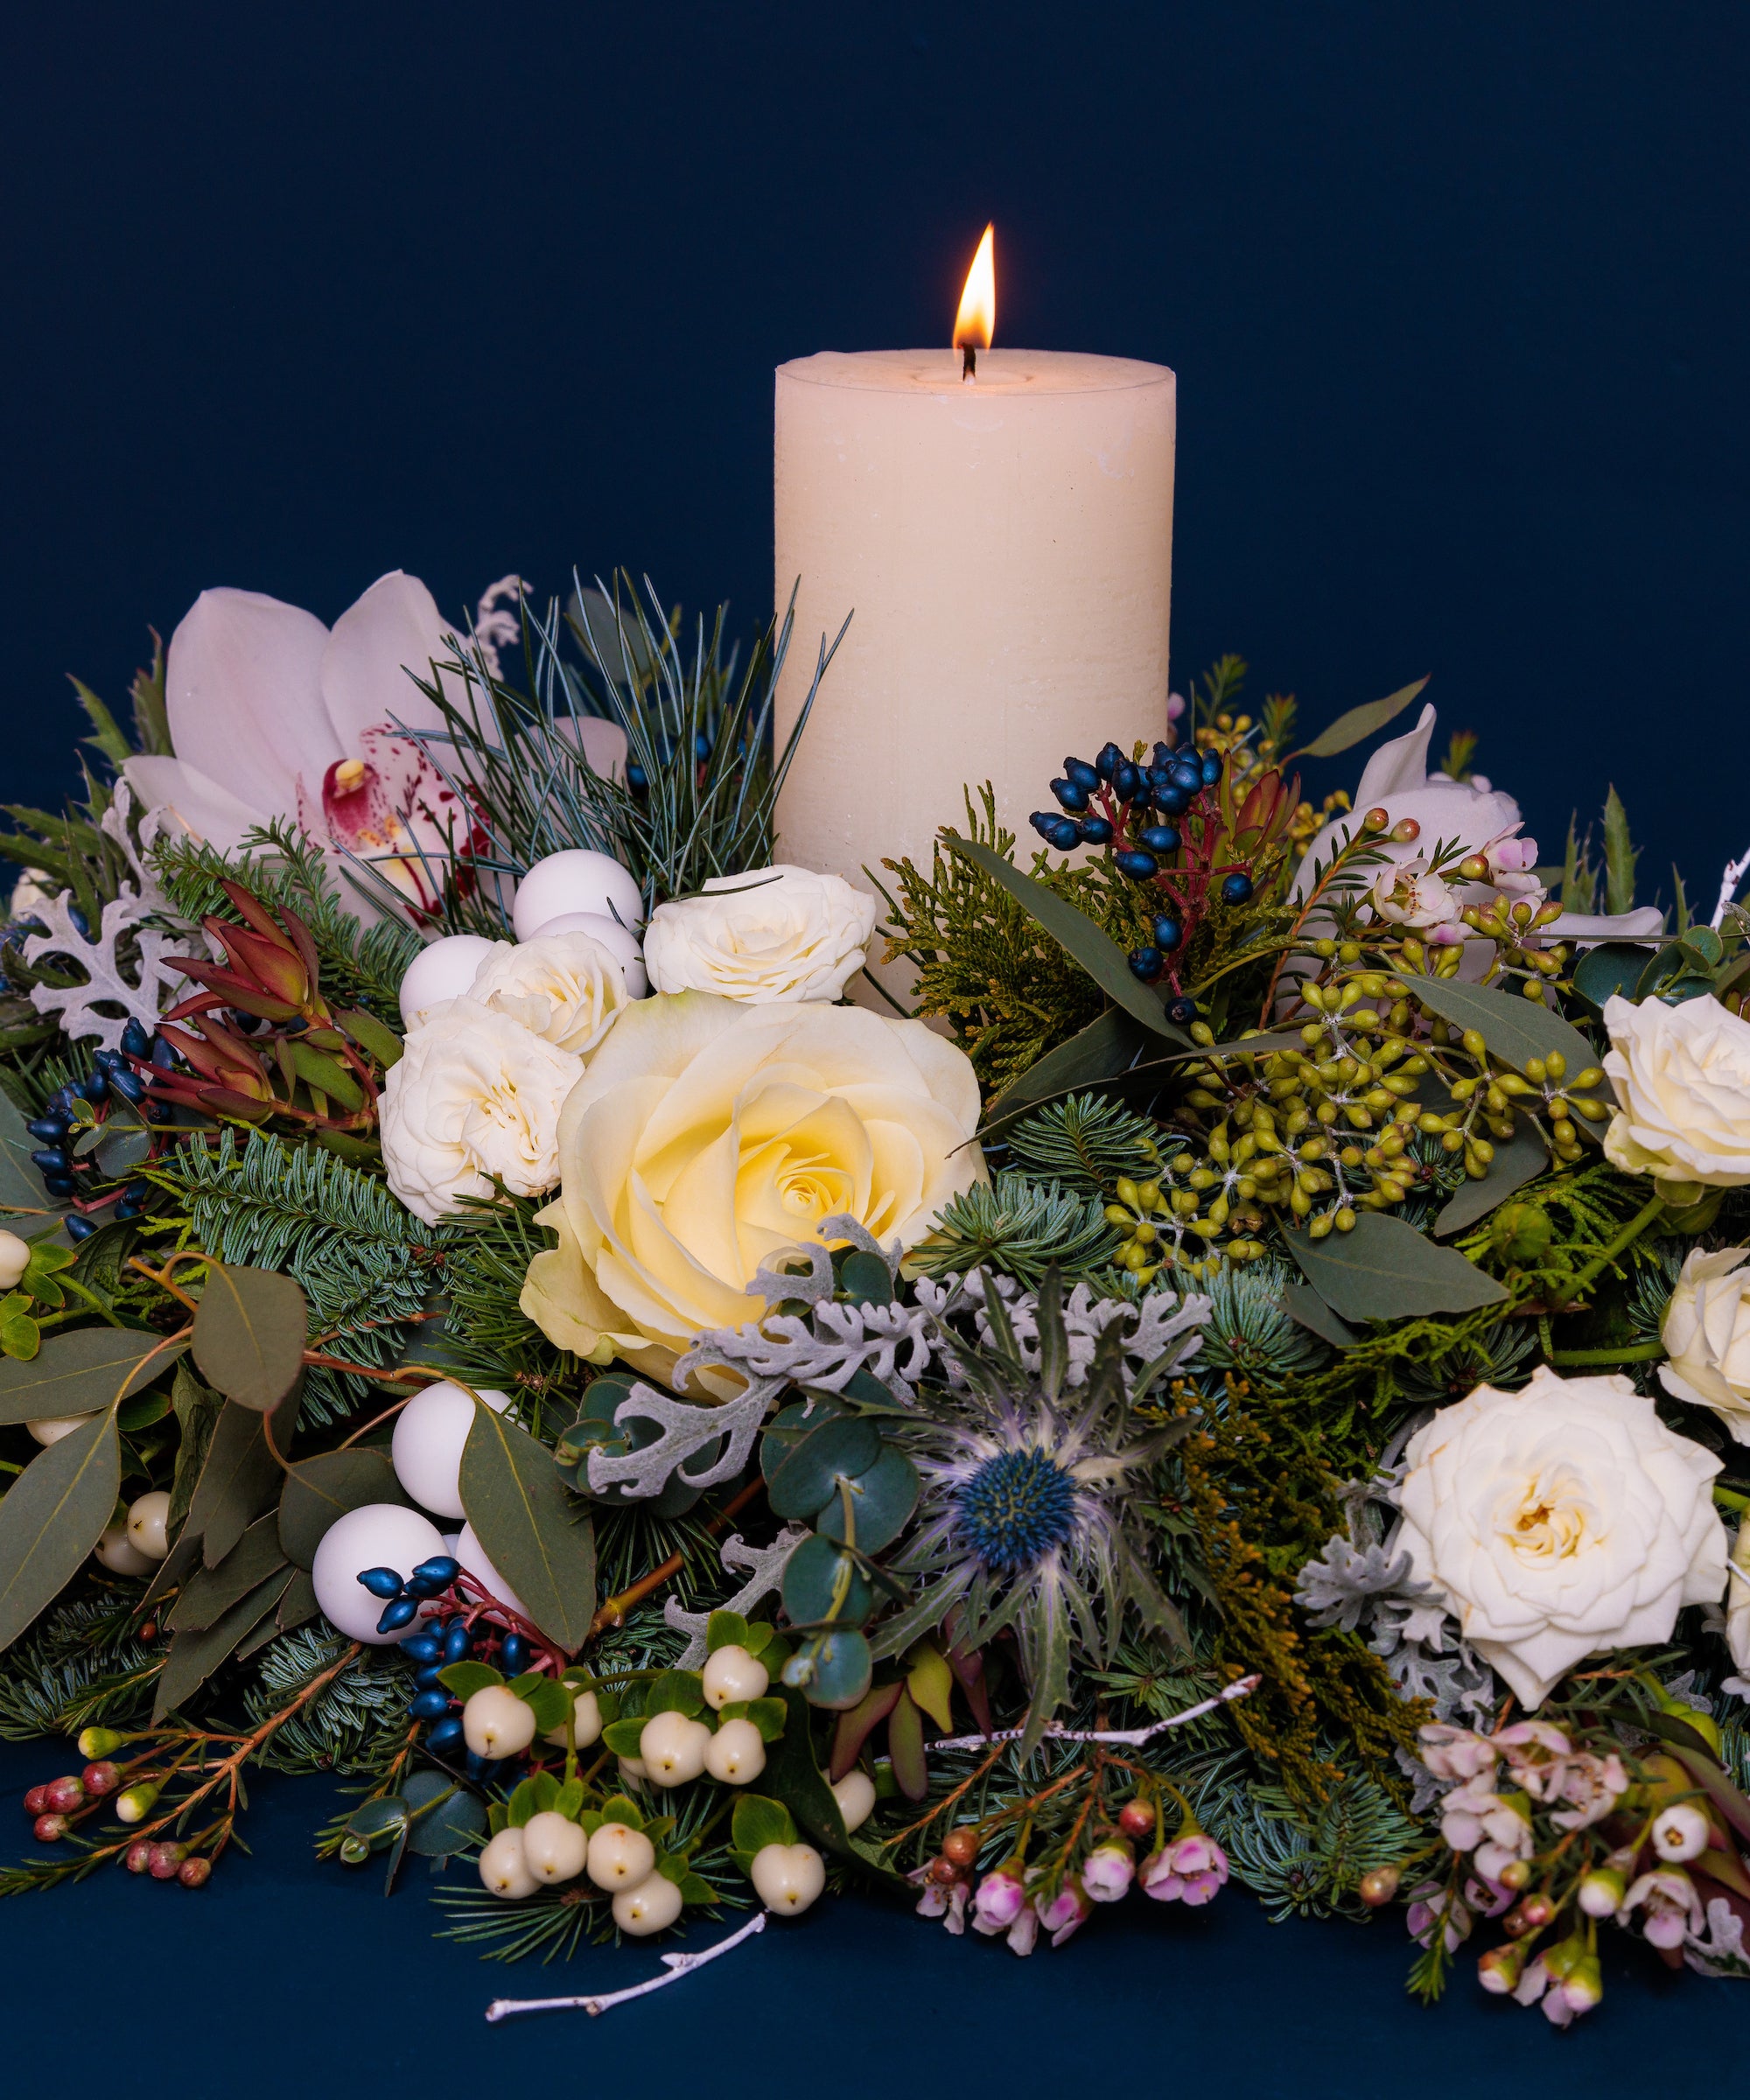 Christmas Dinner Table Arrangement with Ivory Candle